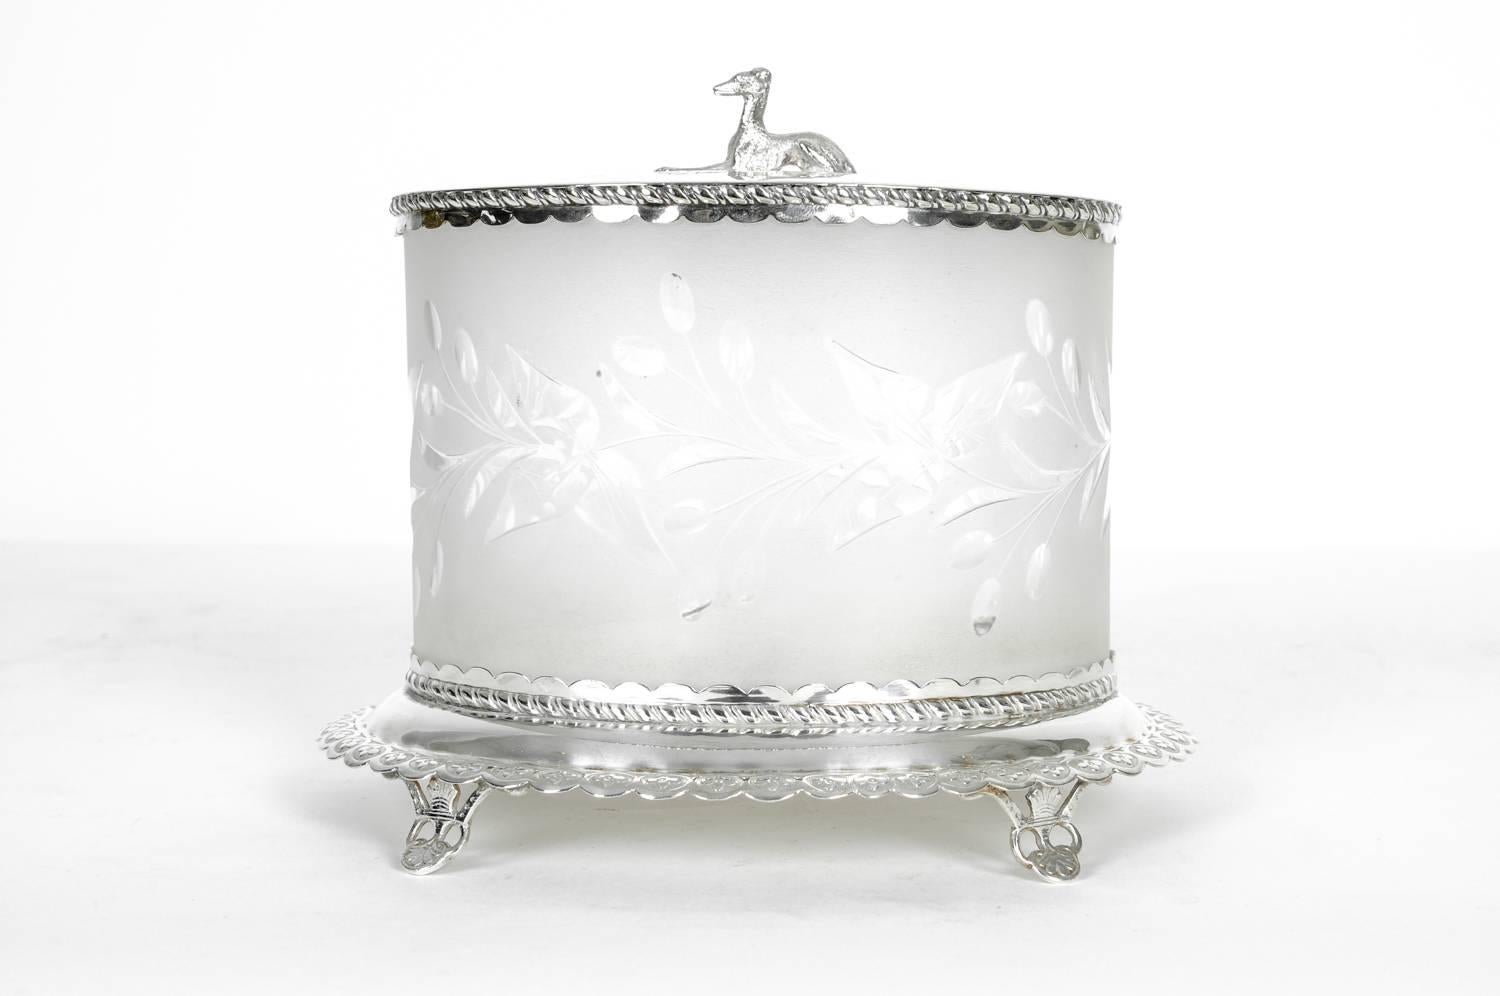 Antique English oval form cut crystal with silver plated footed holding base carrier covered top with dog sculpture design details ice bucket / thin biscuit. The piece is in excellent antique condition maker's mark undersigned. The piece measure 7.3